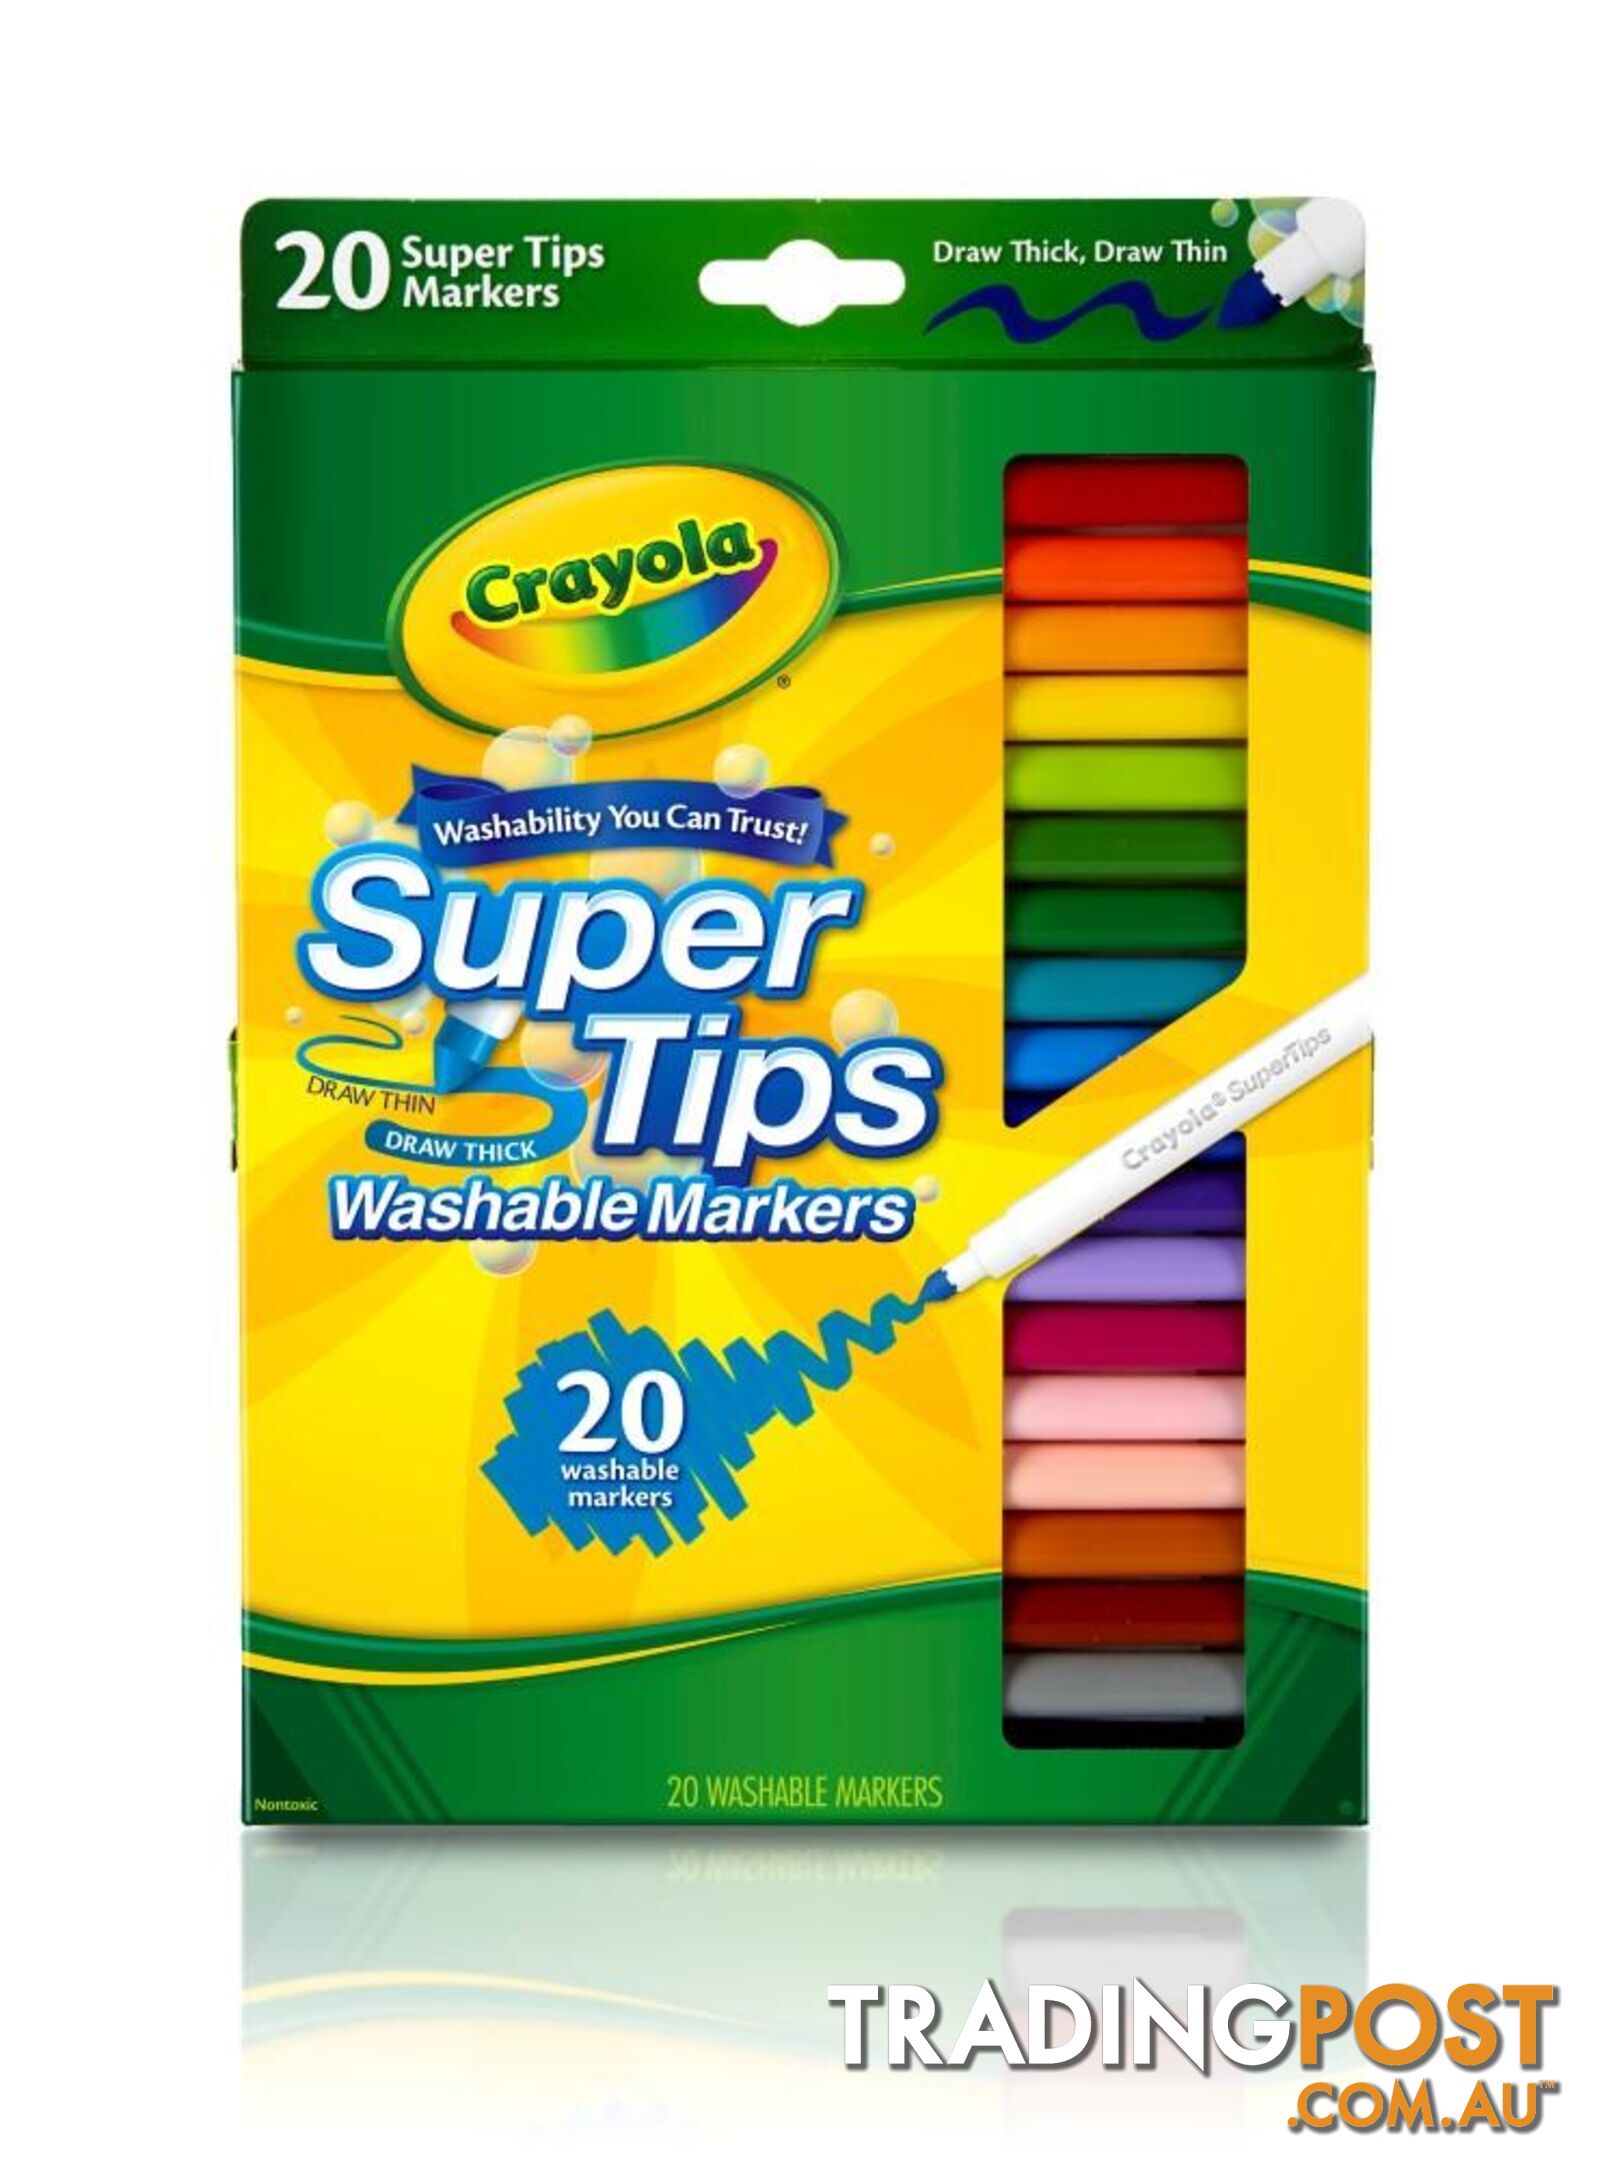 Crayola Super Tips Washable Markers - 20 Pack Bs588106 - 071662081065